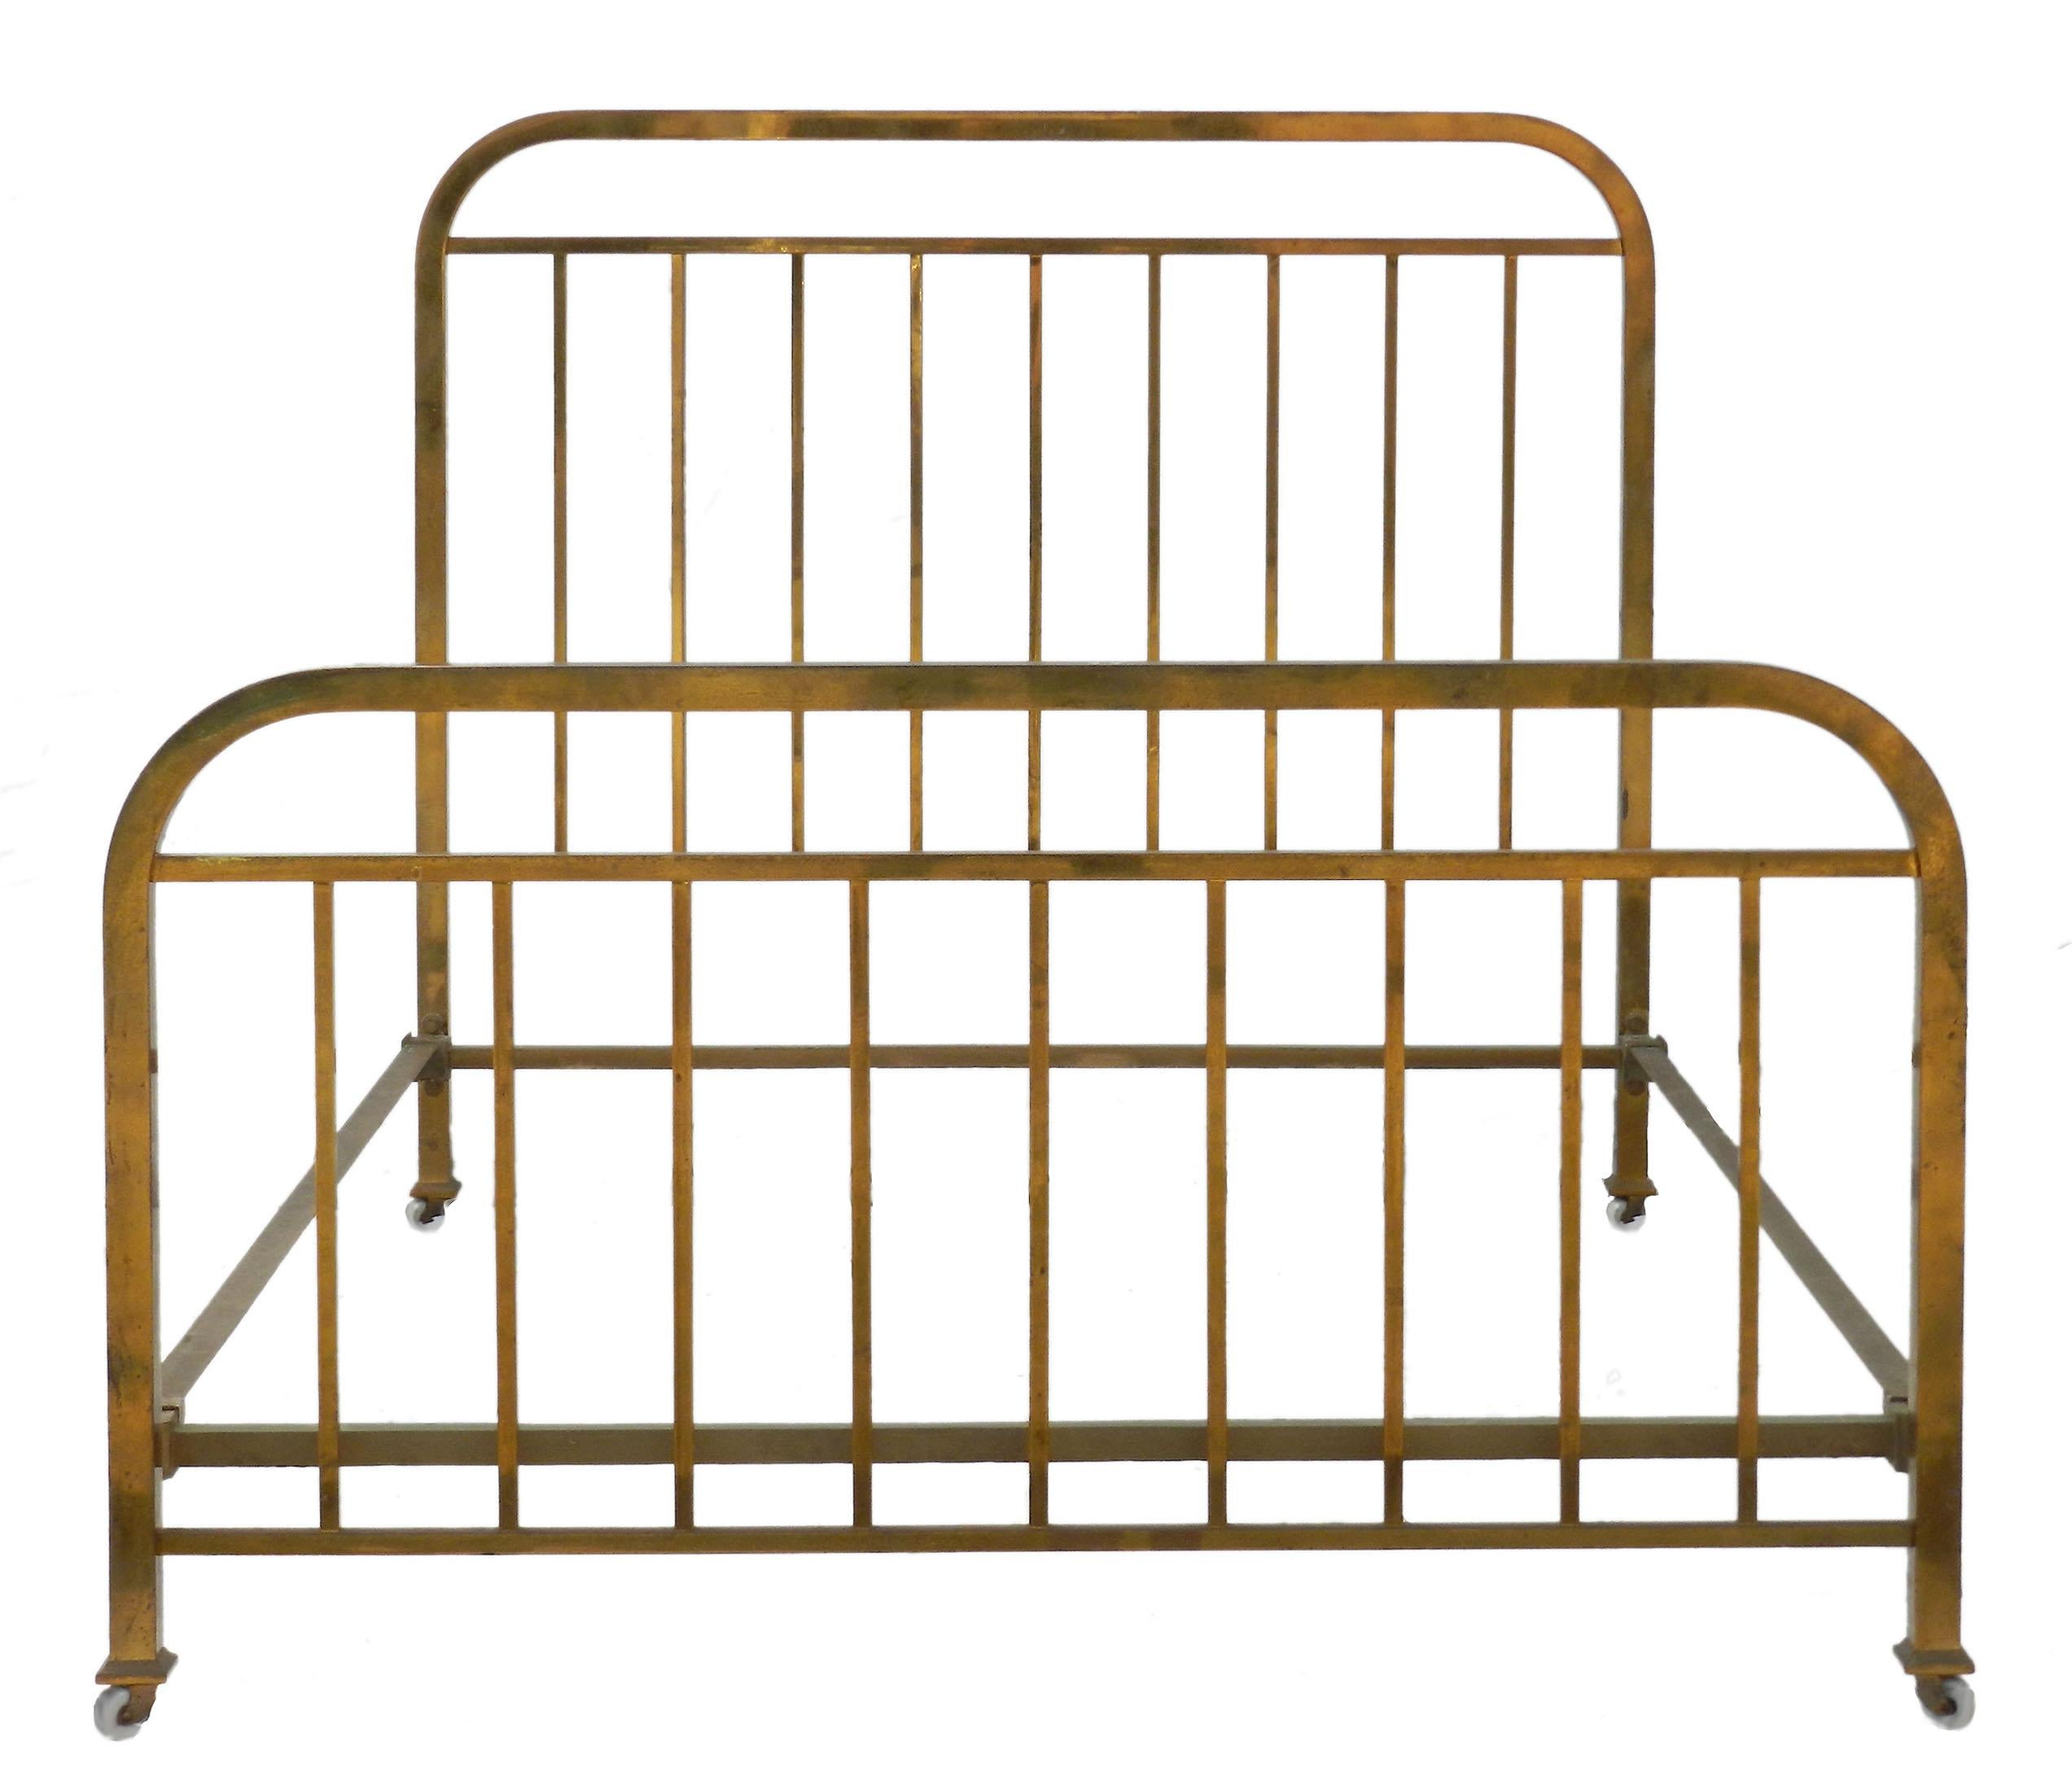 Brass Bed US Queen UK King Size Art Deco, French, c1930
The finish has signs of use and wear
This will take a US Queen or UK King size mattress either on wooden slats, Bunkie or shallow base.
This bed frame dismantles for shipping and placing in